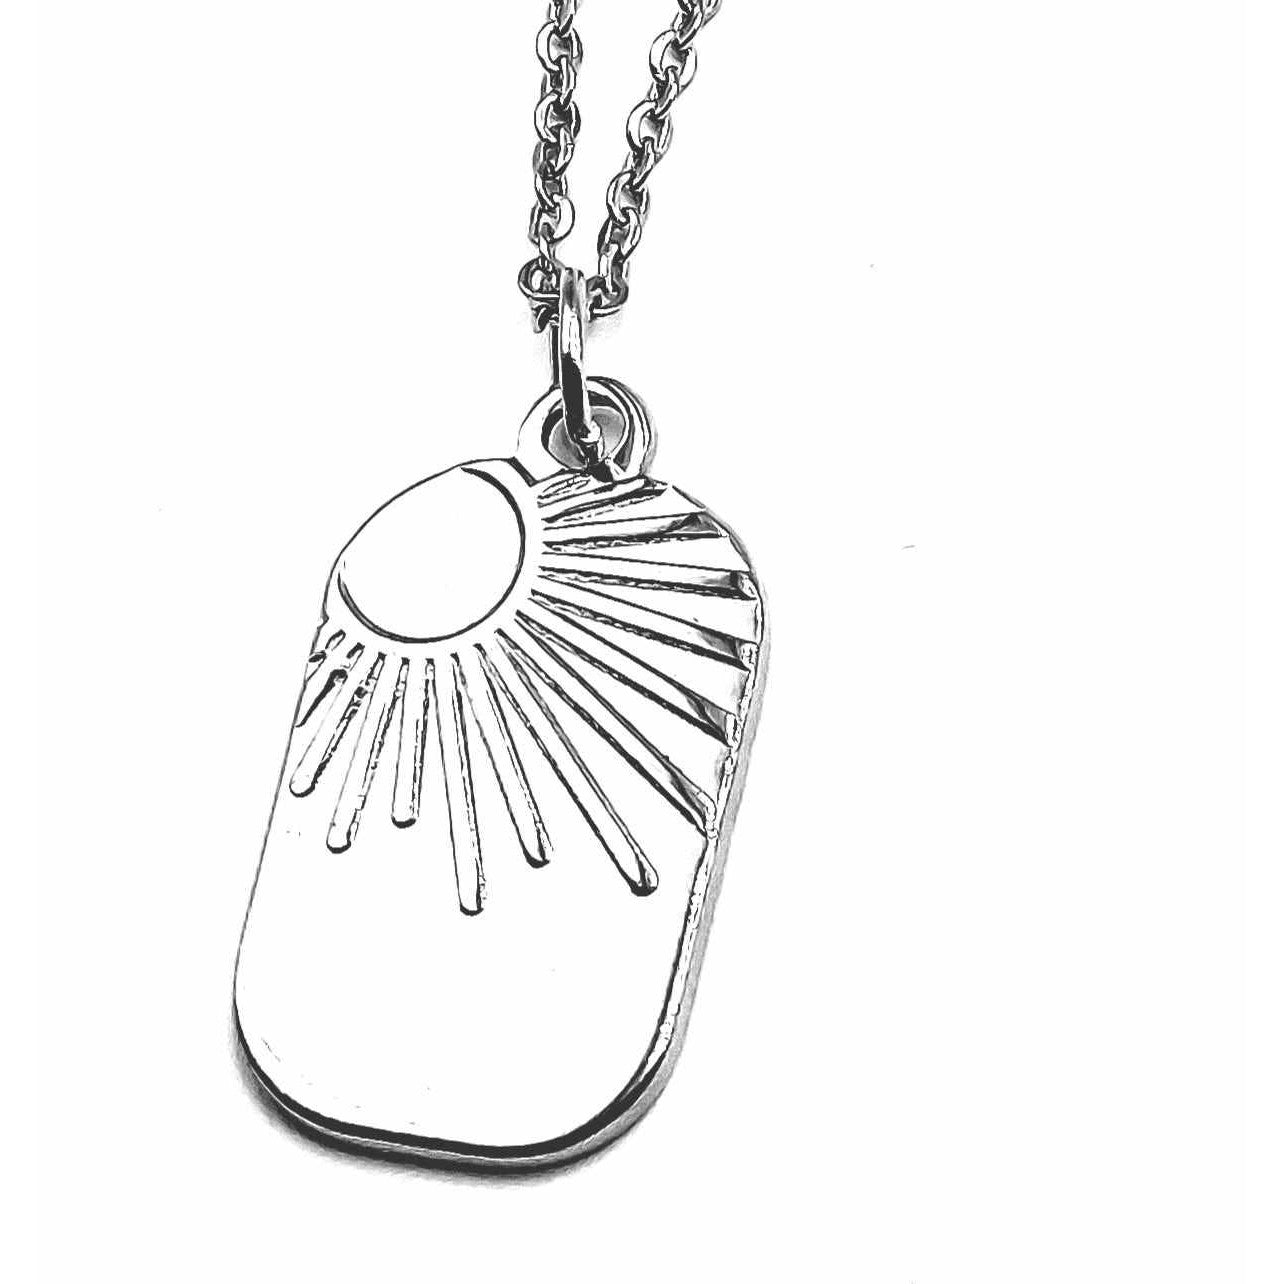 Sun Goddess Stainless Steel Necklace | Silver Dog Tag Style Pendant on Chain